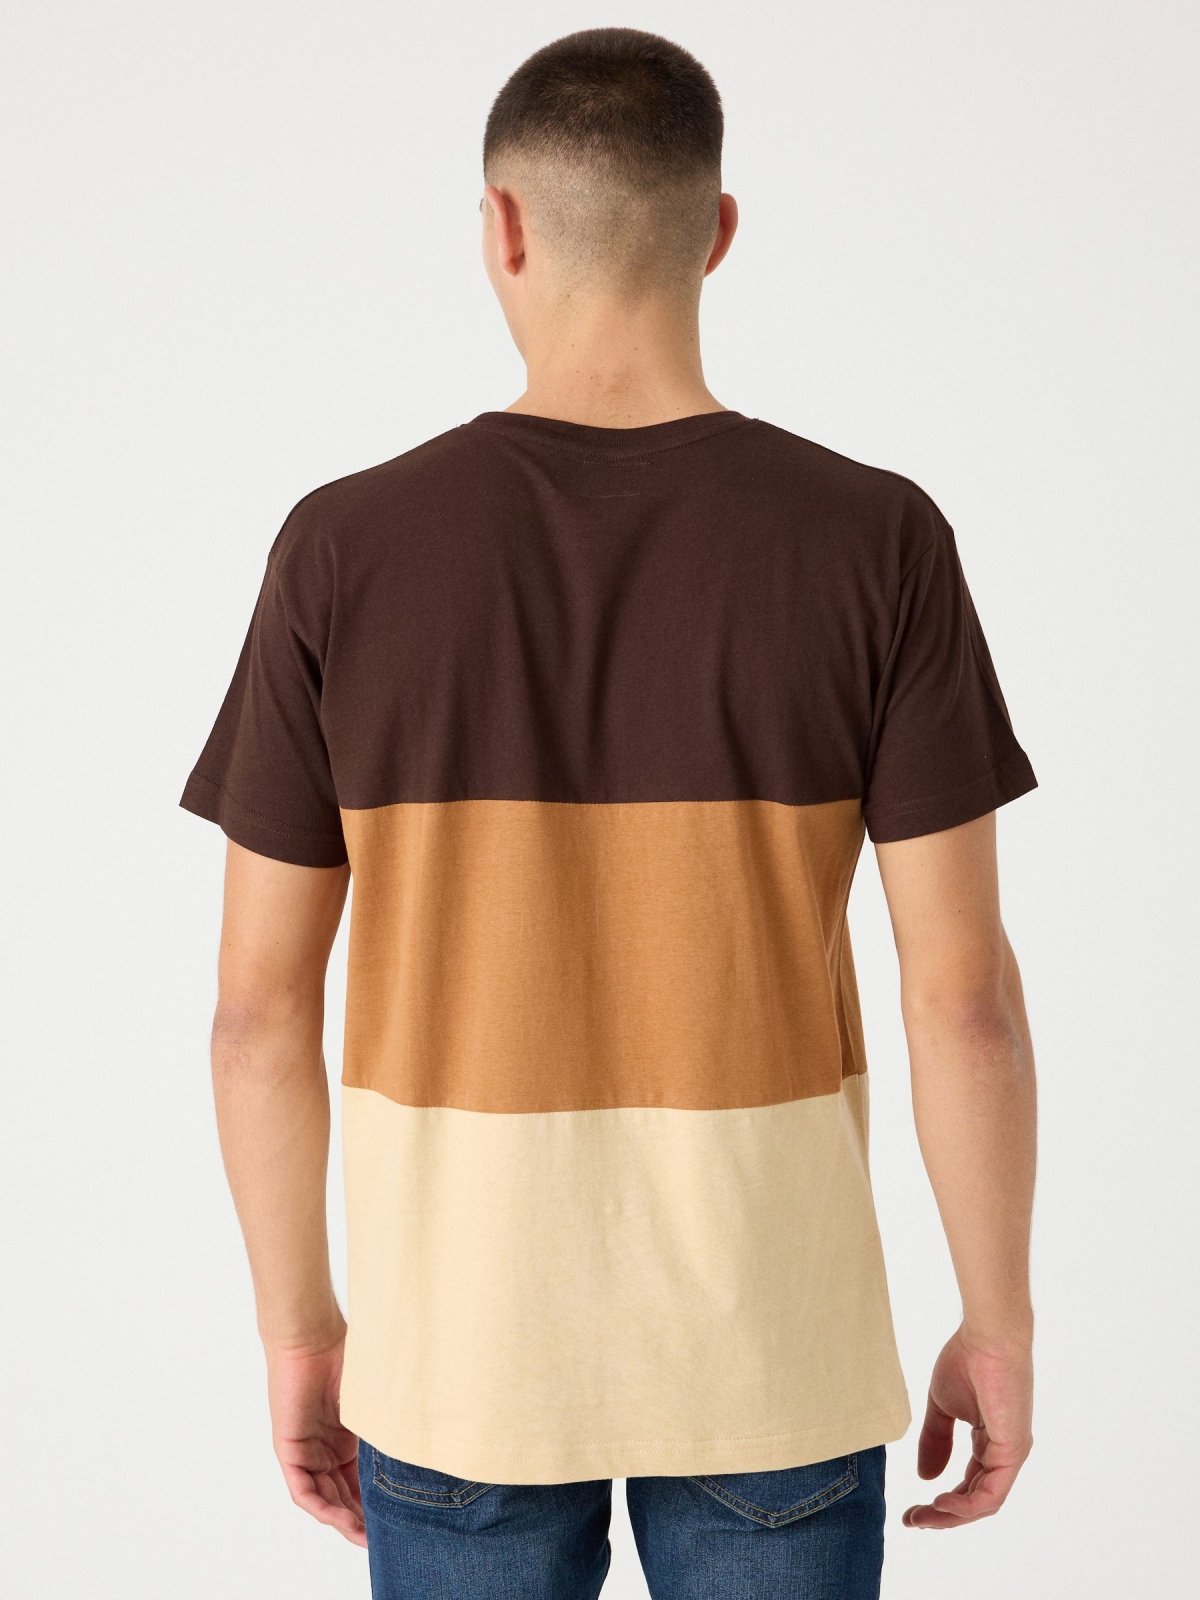 Colour-block t-shirt with text print earth brown middle back view